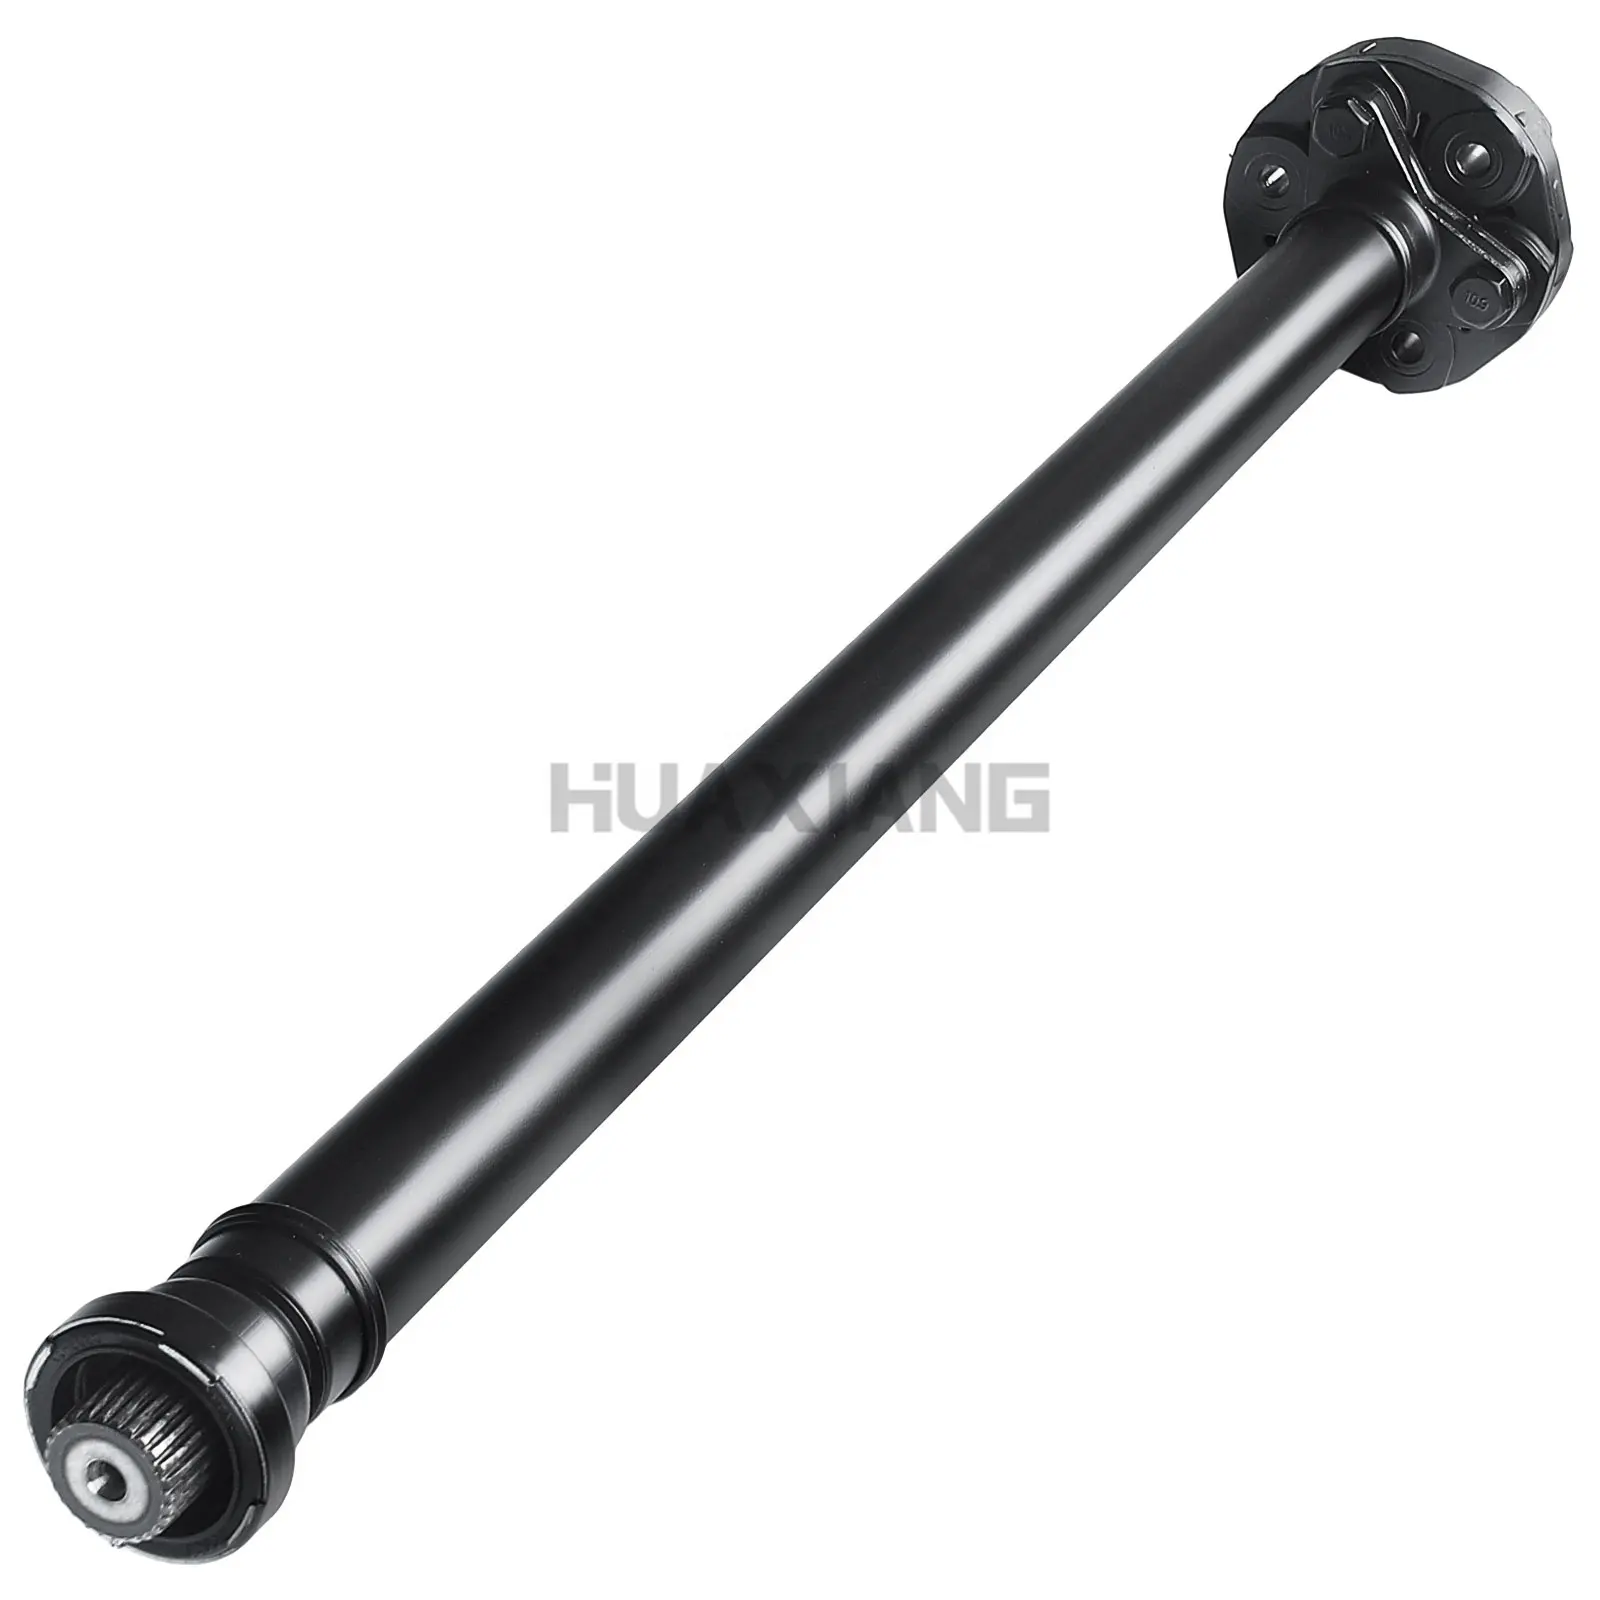 4WD Front Propshaft Driveshaft for BMW E53 X5 2000-09/2003 774MM 26207508629